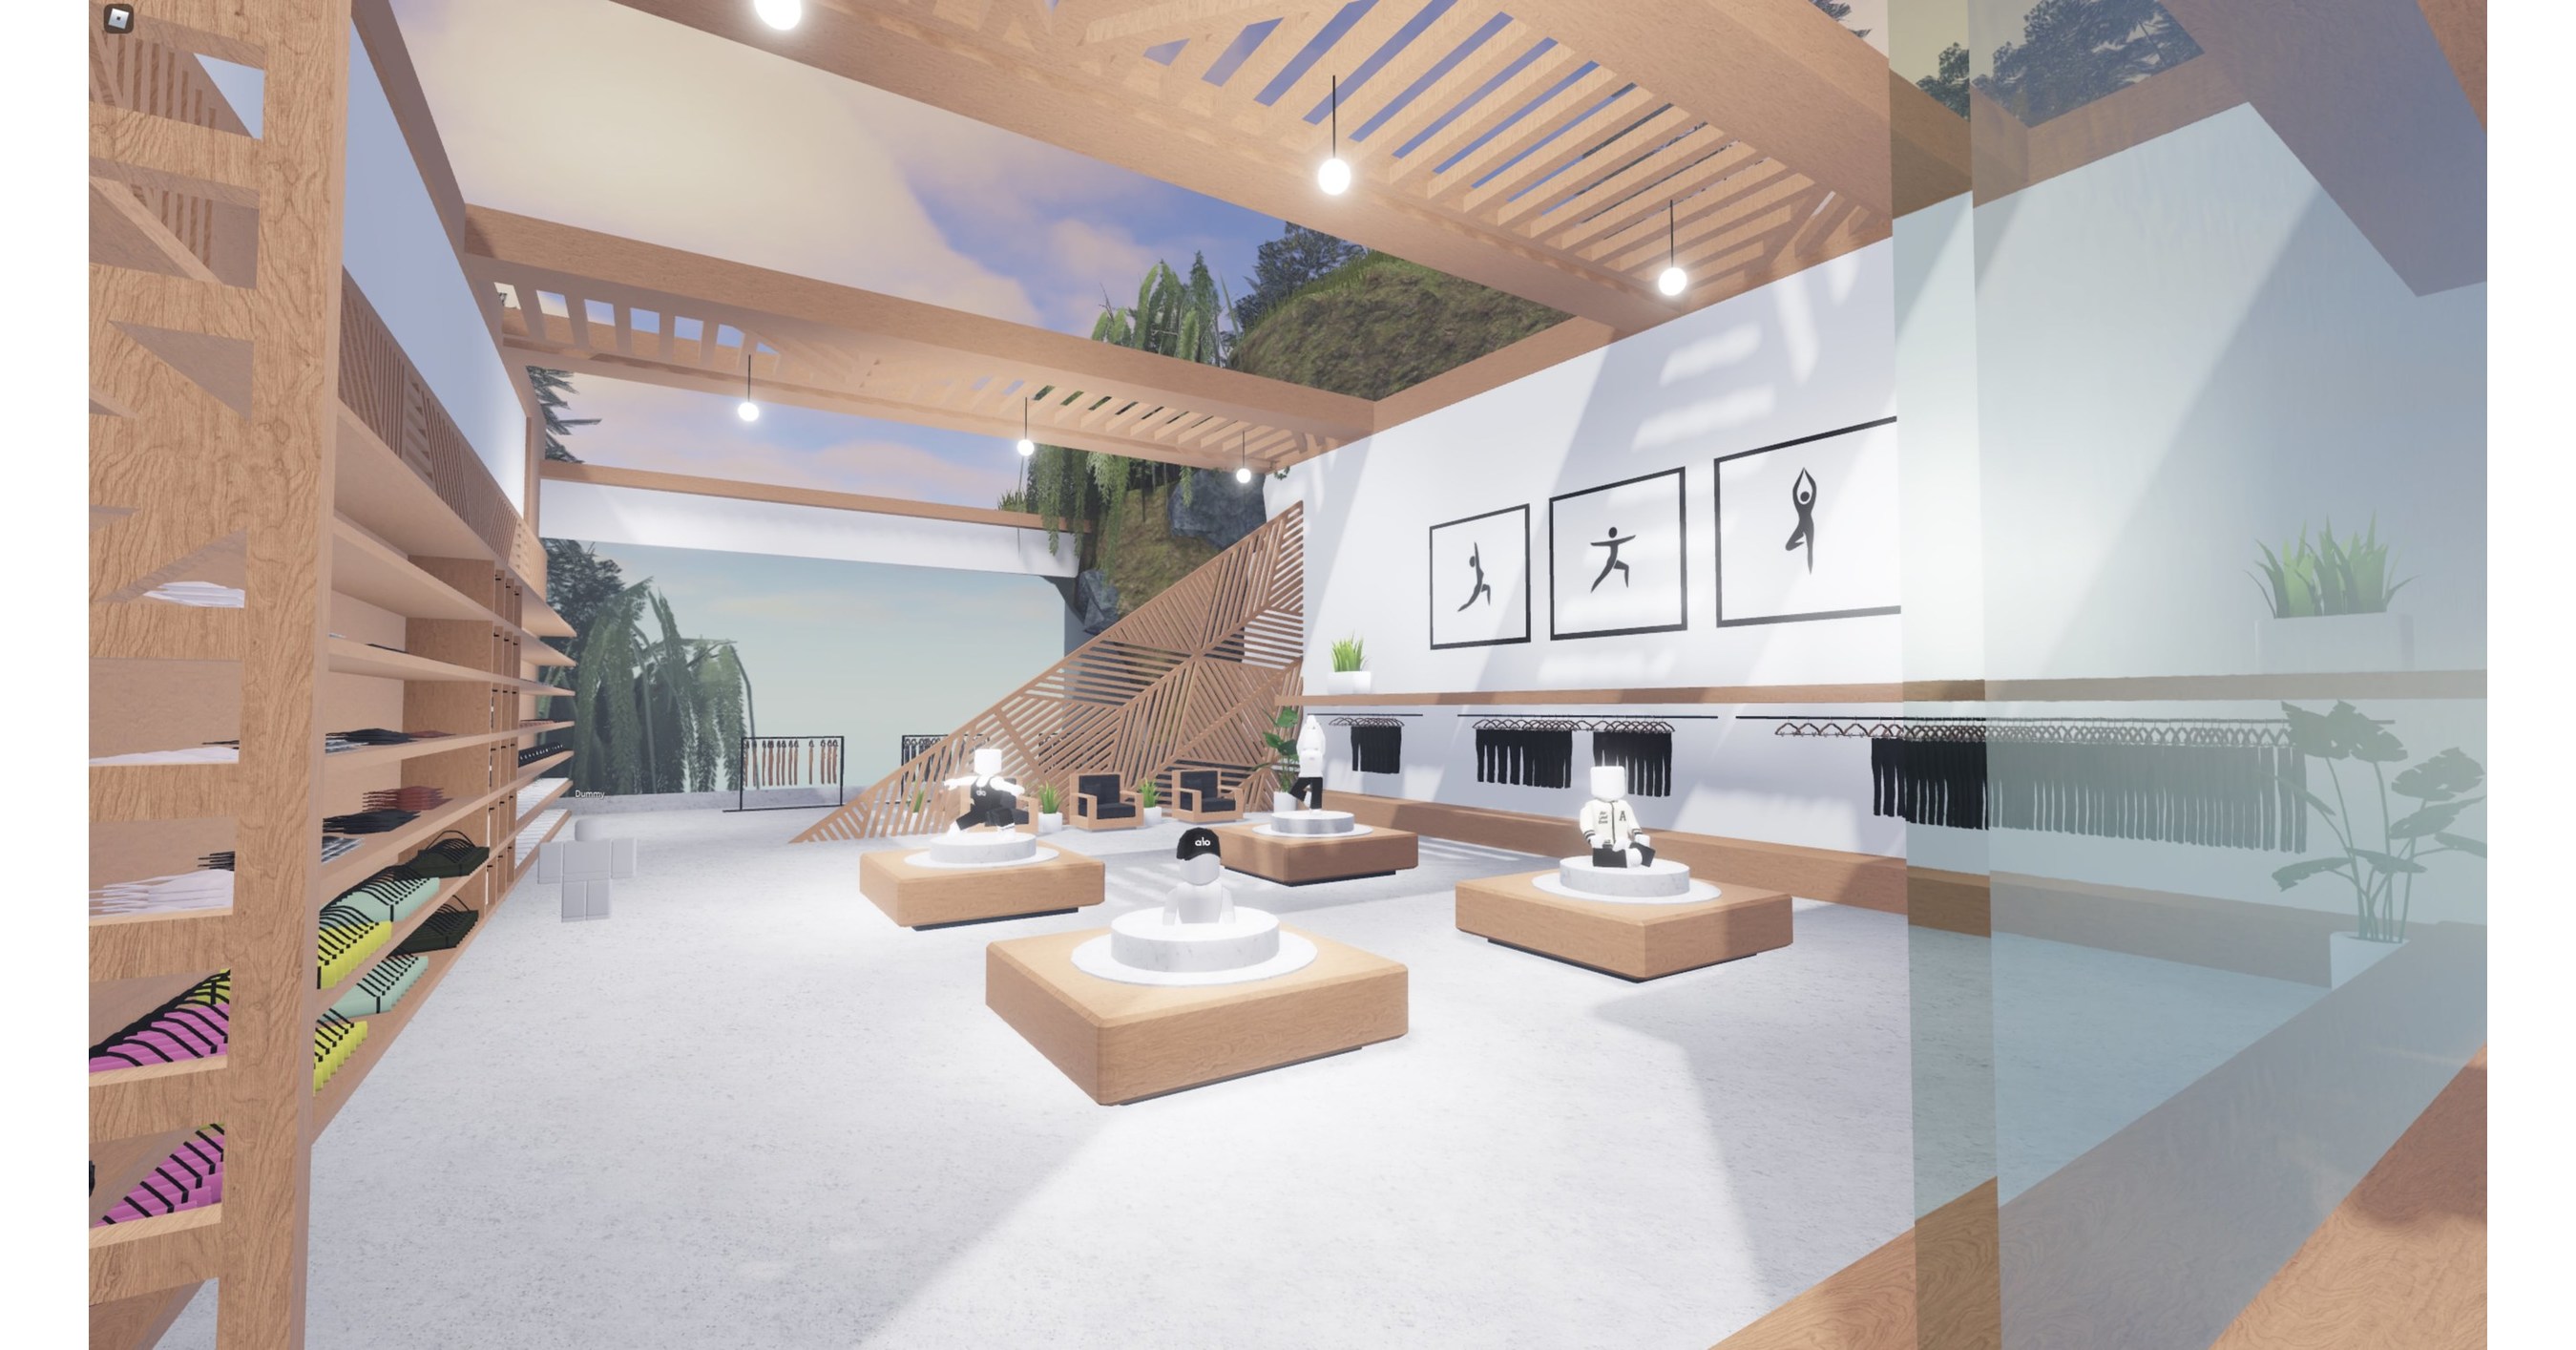 ALO YOGA BRINGS WELLNESS TO THE METAVERSE WITH ROBLOX